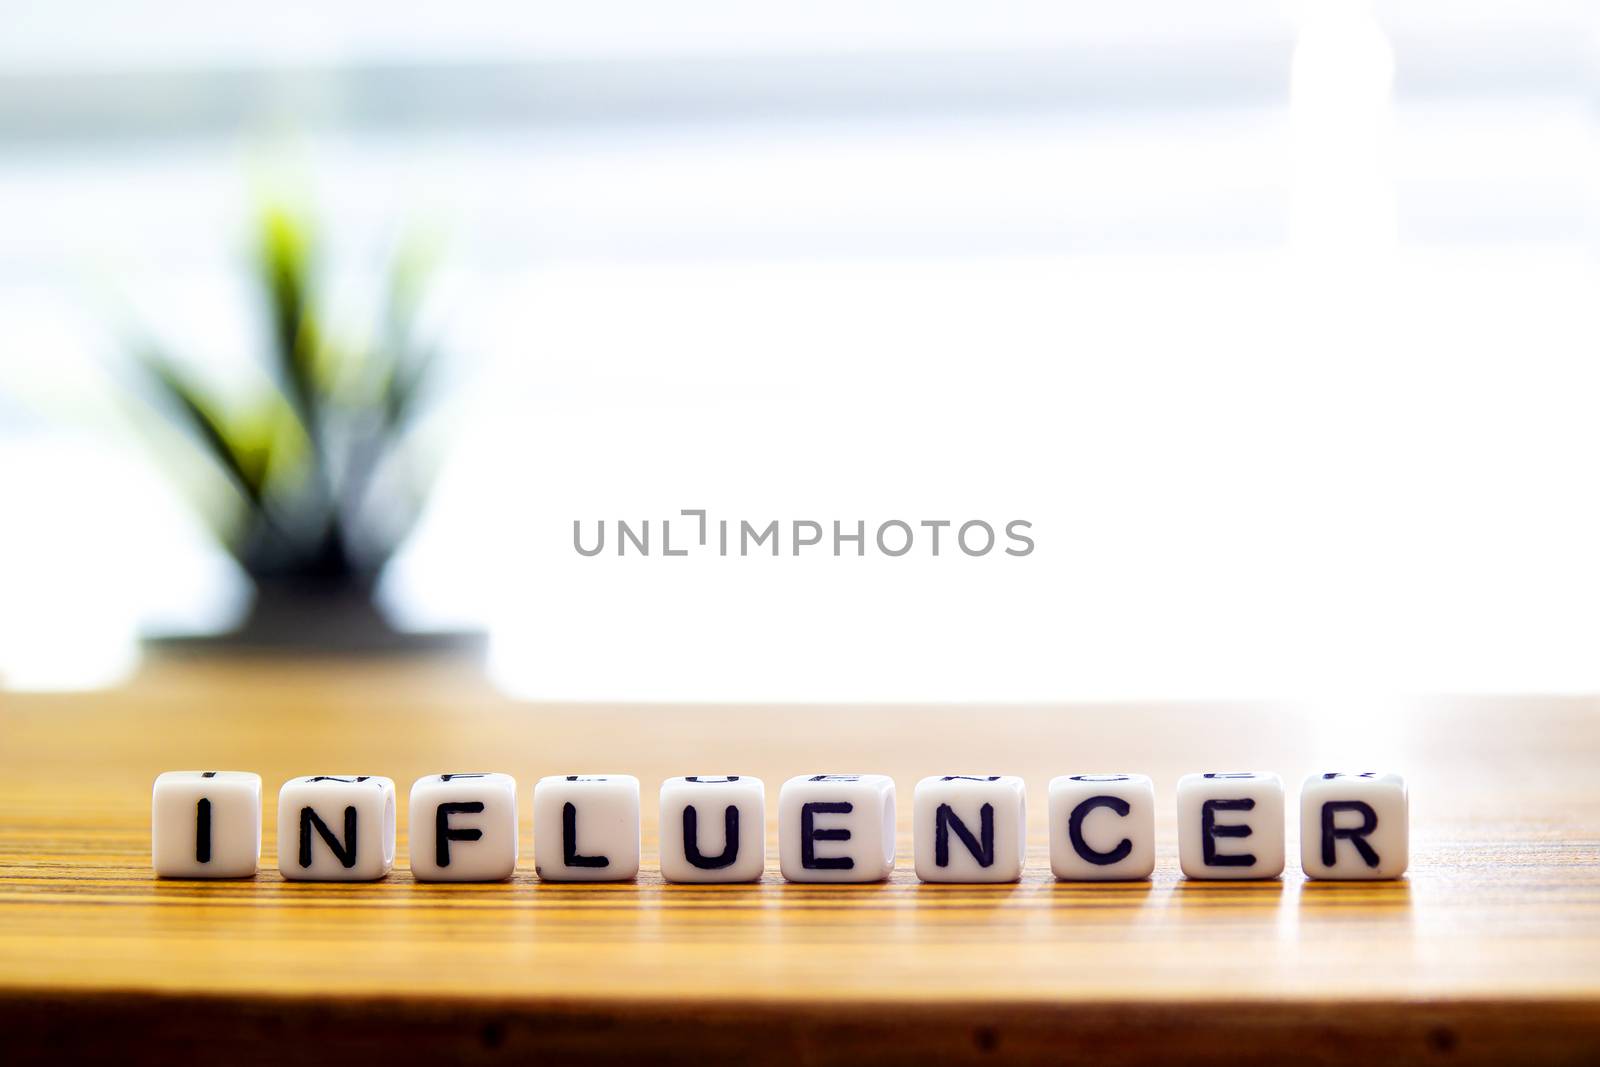 Influencer message text on white blocks on a wooden table